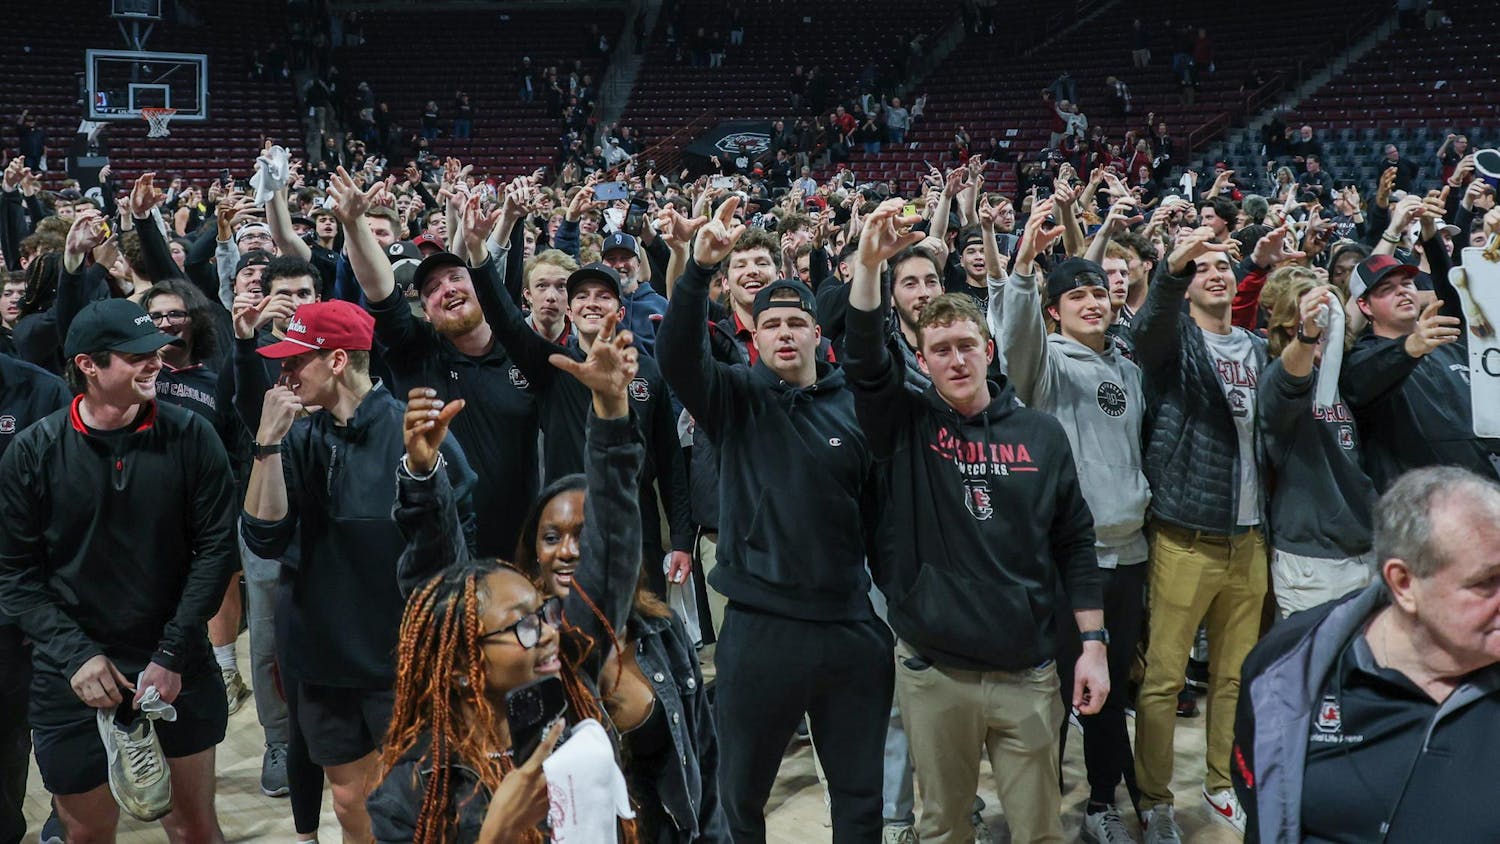 FILE- Gamecock fans raise their arms as a toast to South Carolina while the Carolina Band plays the alma mater following the men's basketball victory over Kentucky on Jan. 23, 2024. The Gamecock men's and women's basketball teams are participating in the NCAA Tournament this year as the No. 6 and No. 1 seeds, respectively.